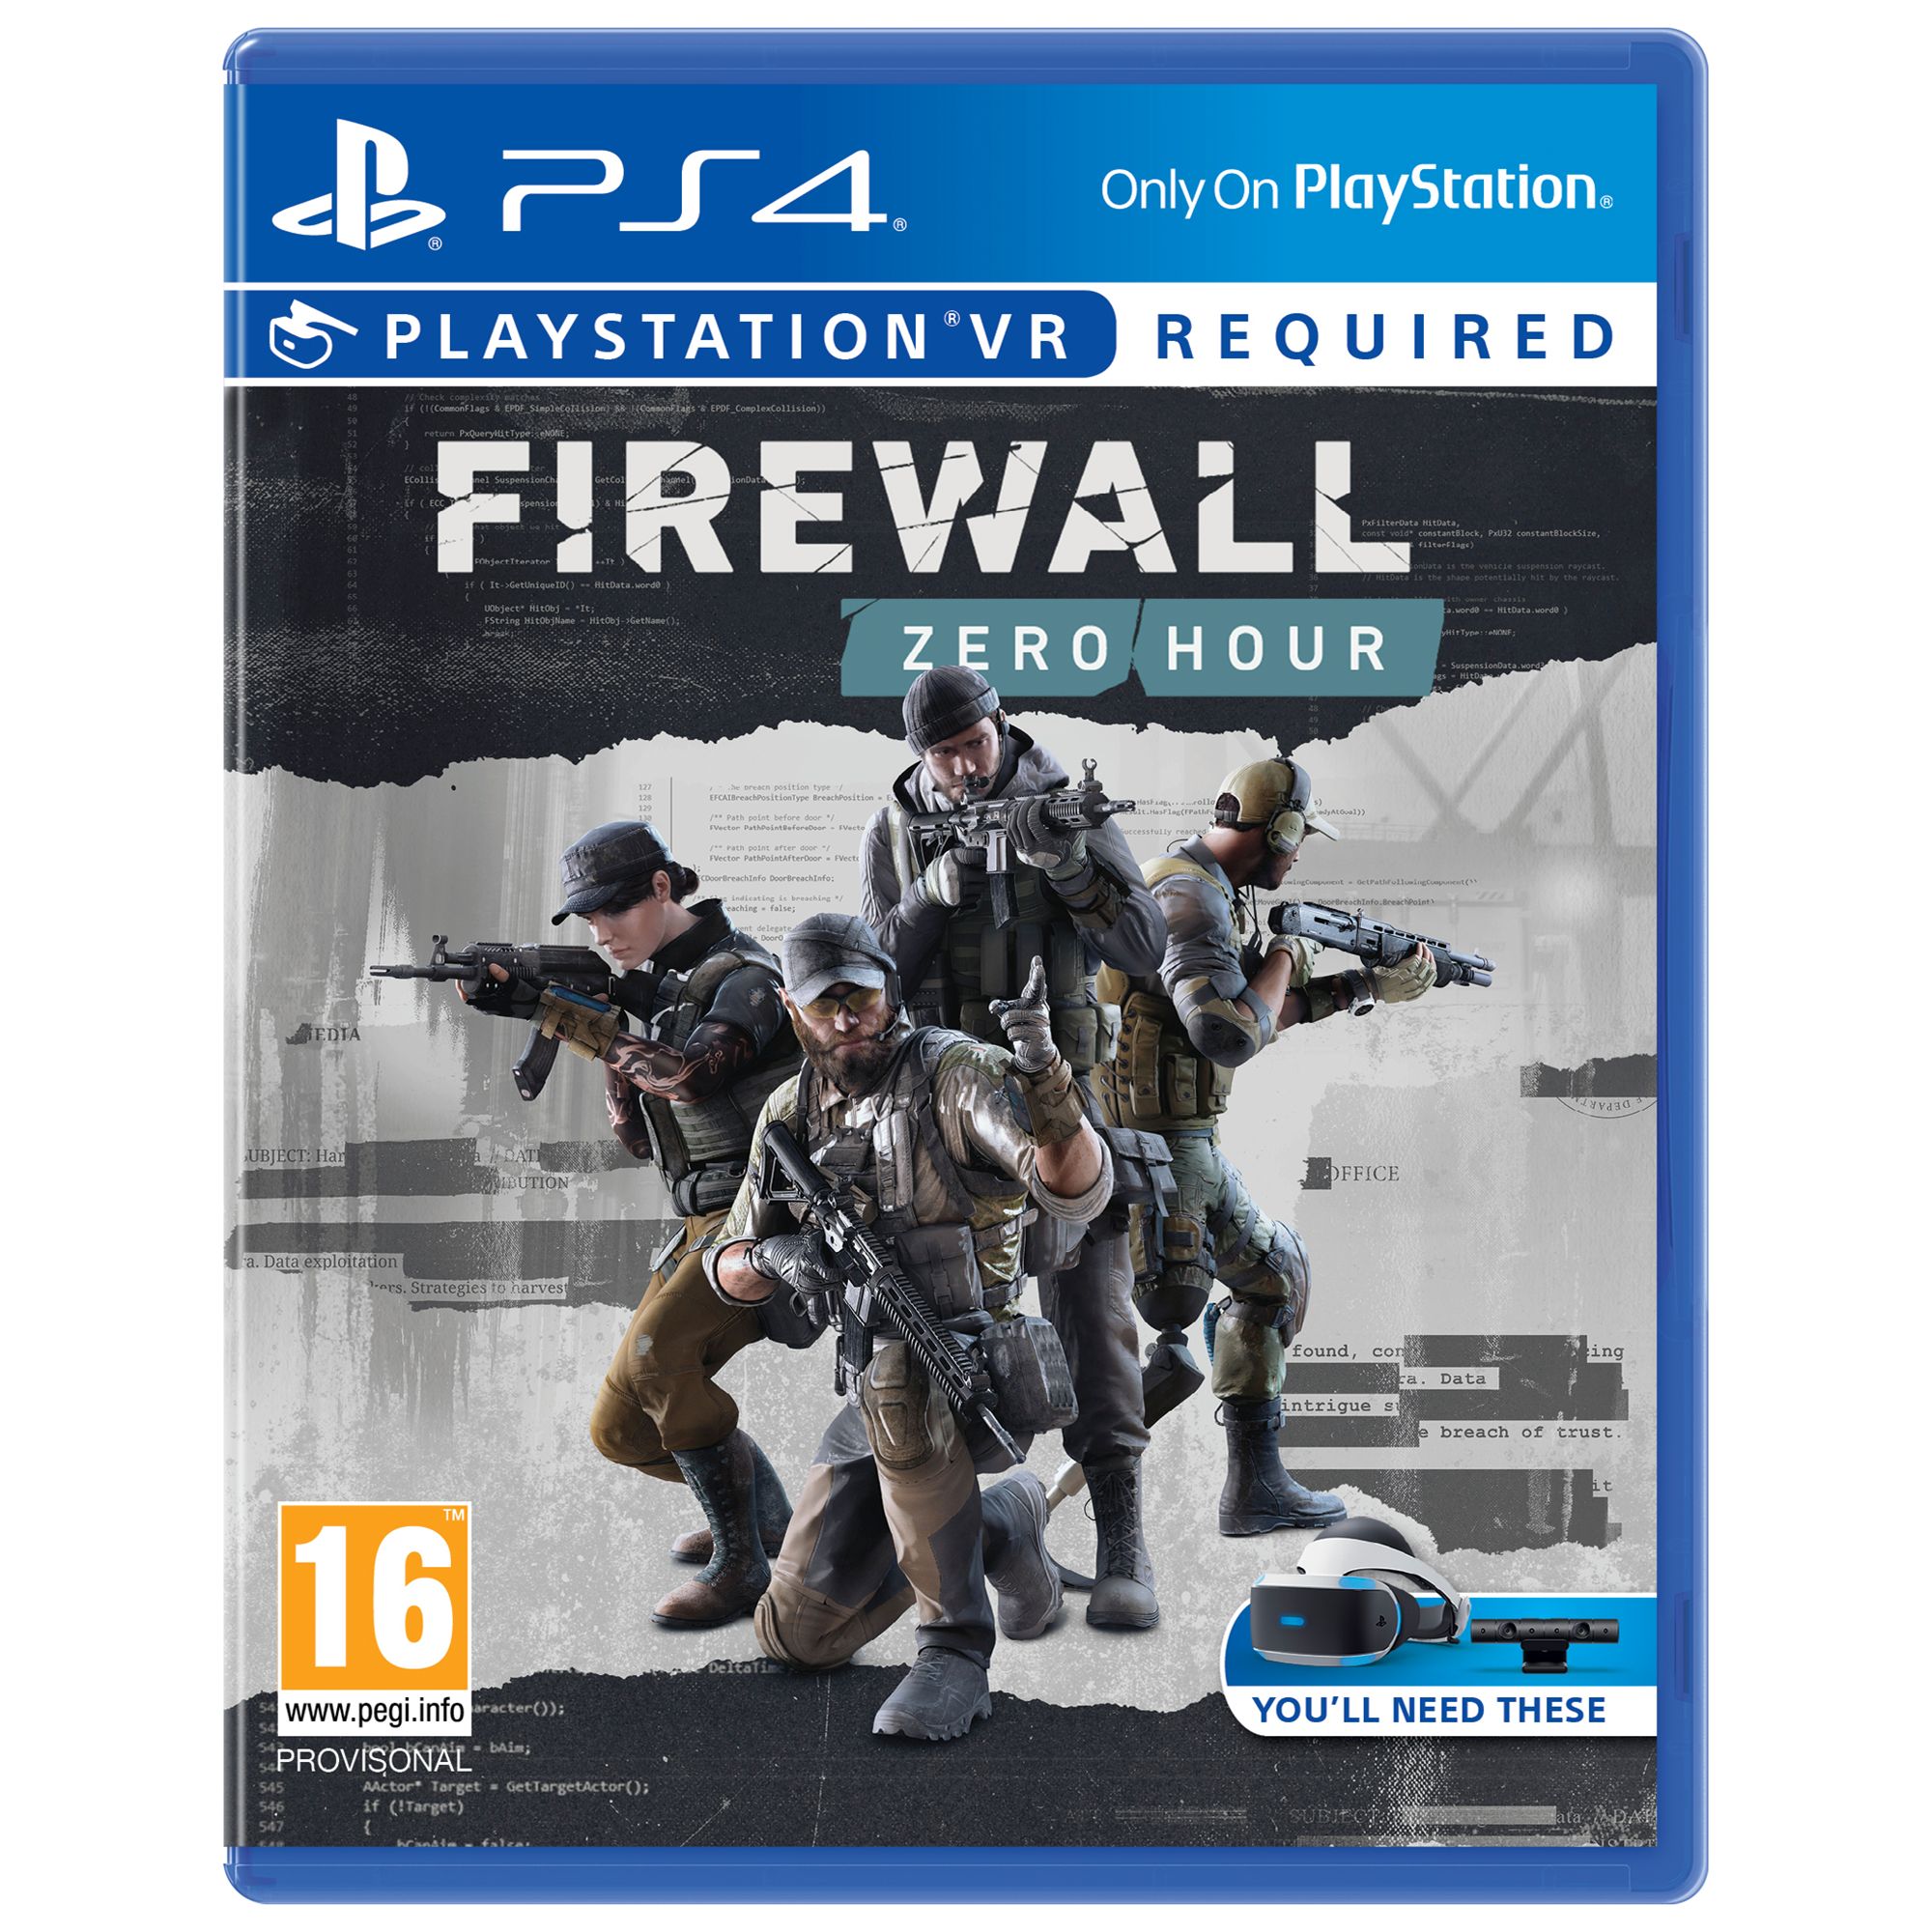 firewall zero hour and aim controller